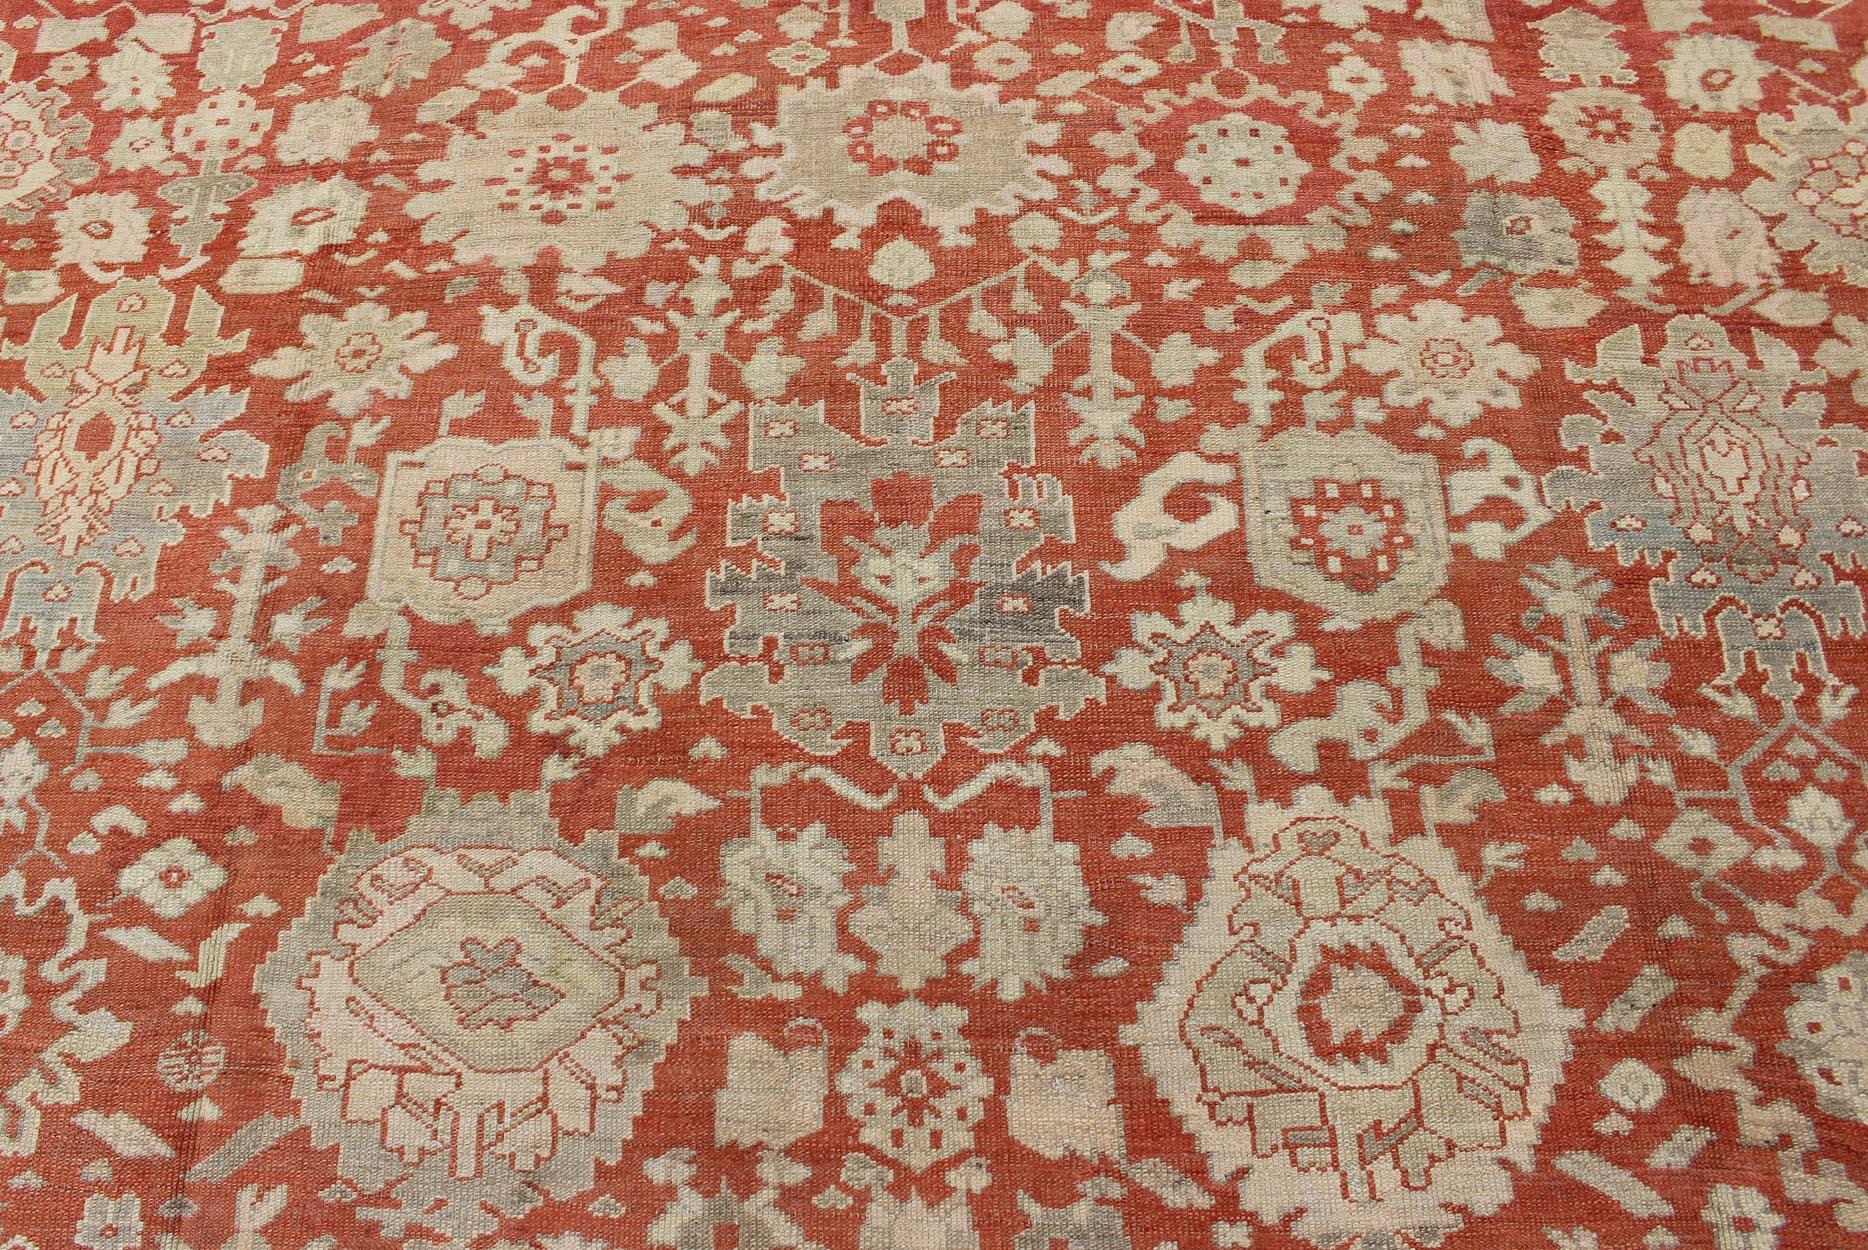 Late 19th Century Large Antique Oushak Rug with Floral Design in Soft Orange, Taupe, Light Green For Sale